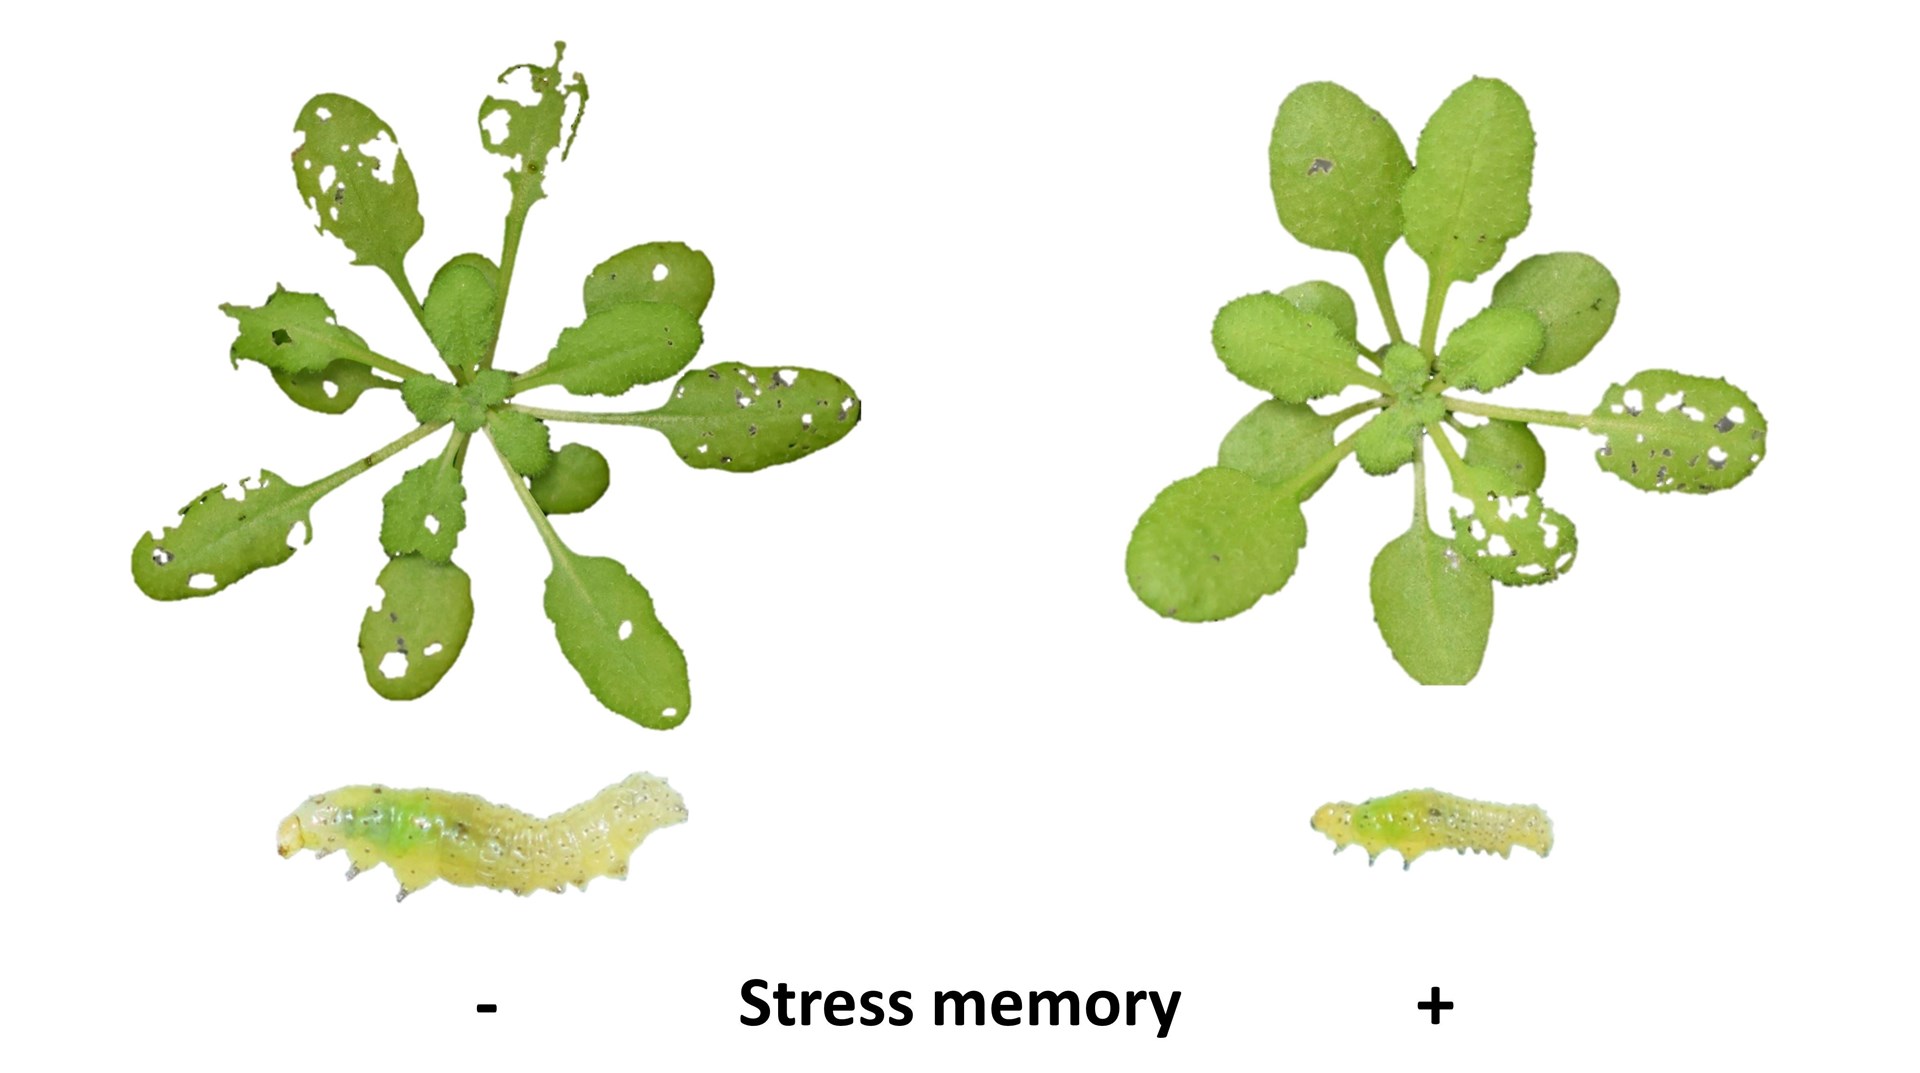 Thale cress that had been treated with the hormone jasmonic acid (right) were stronger against caterpillars than those without (left) (handout/University of Sheffield/PA)